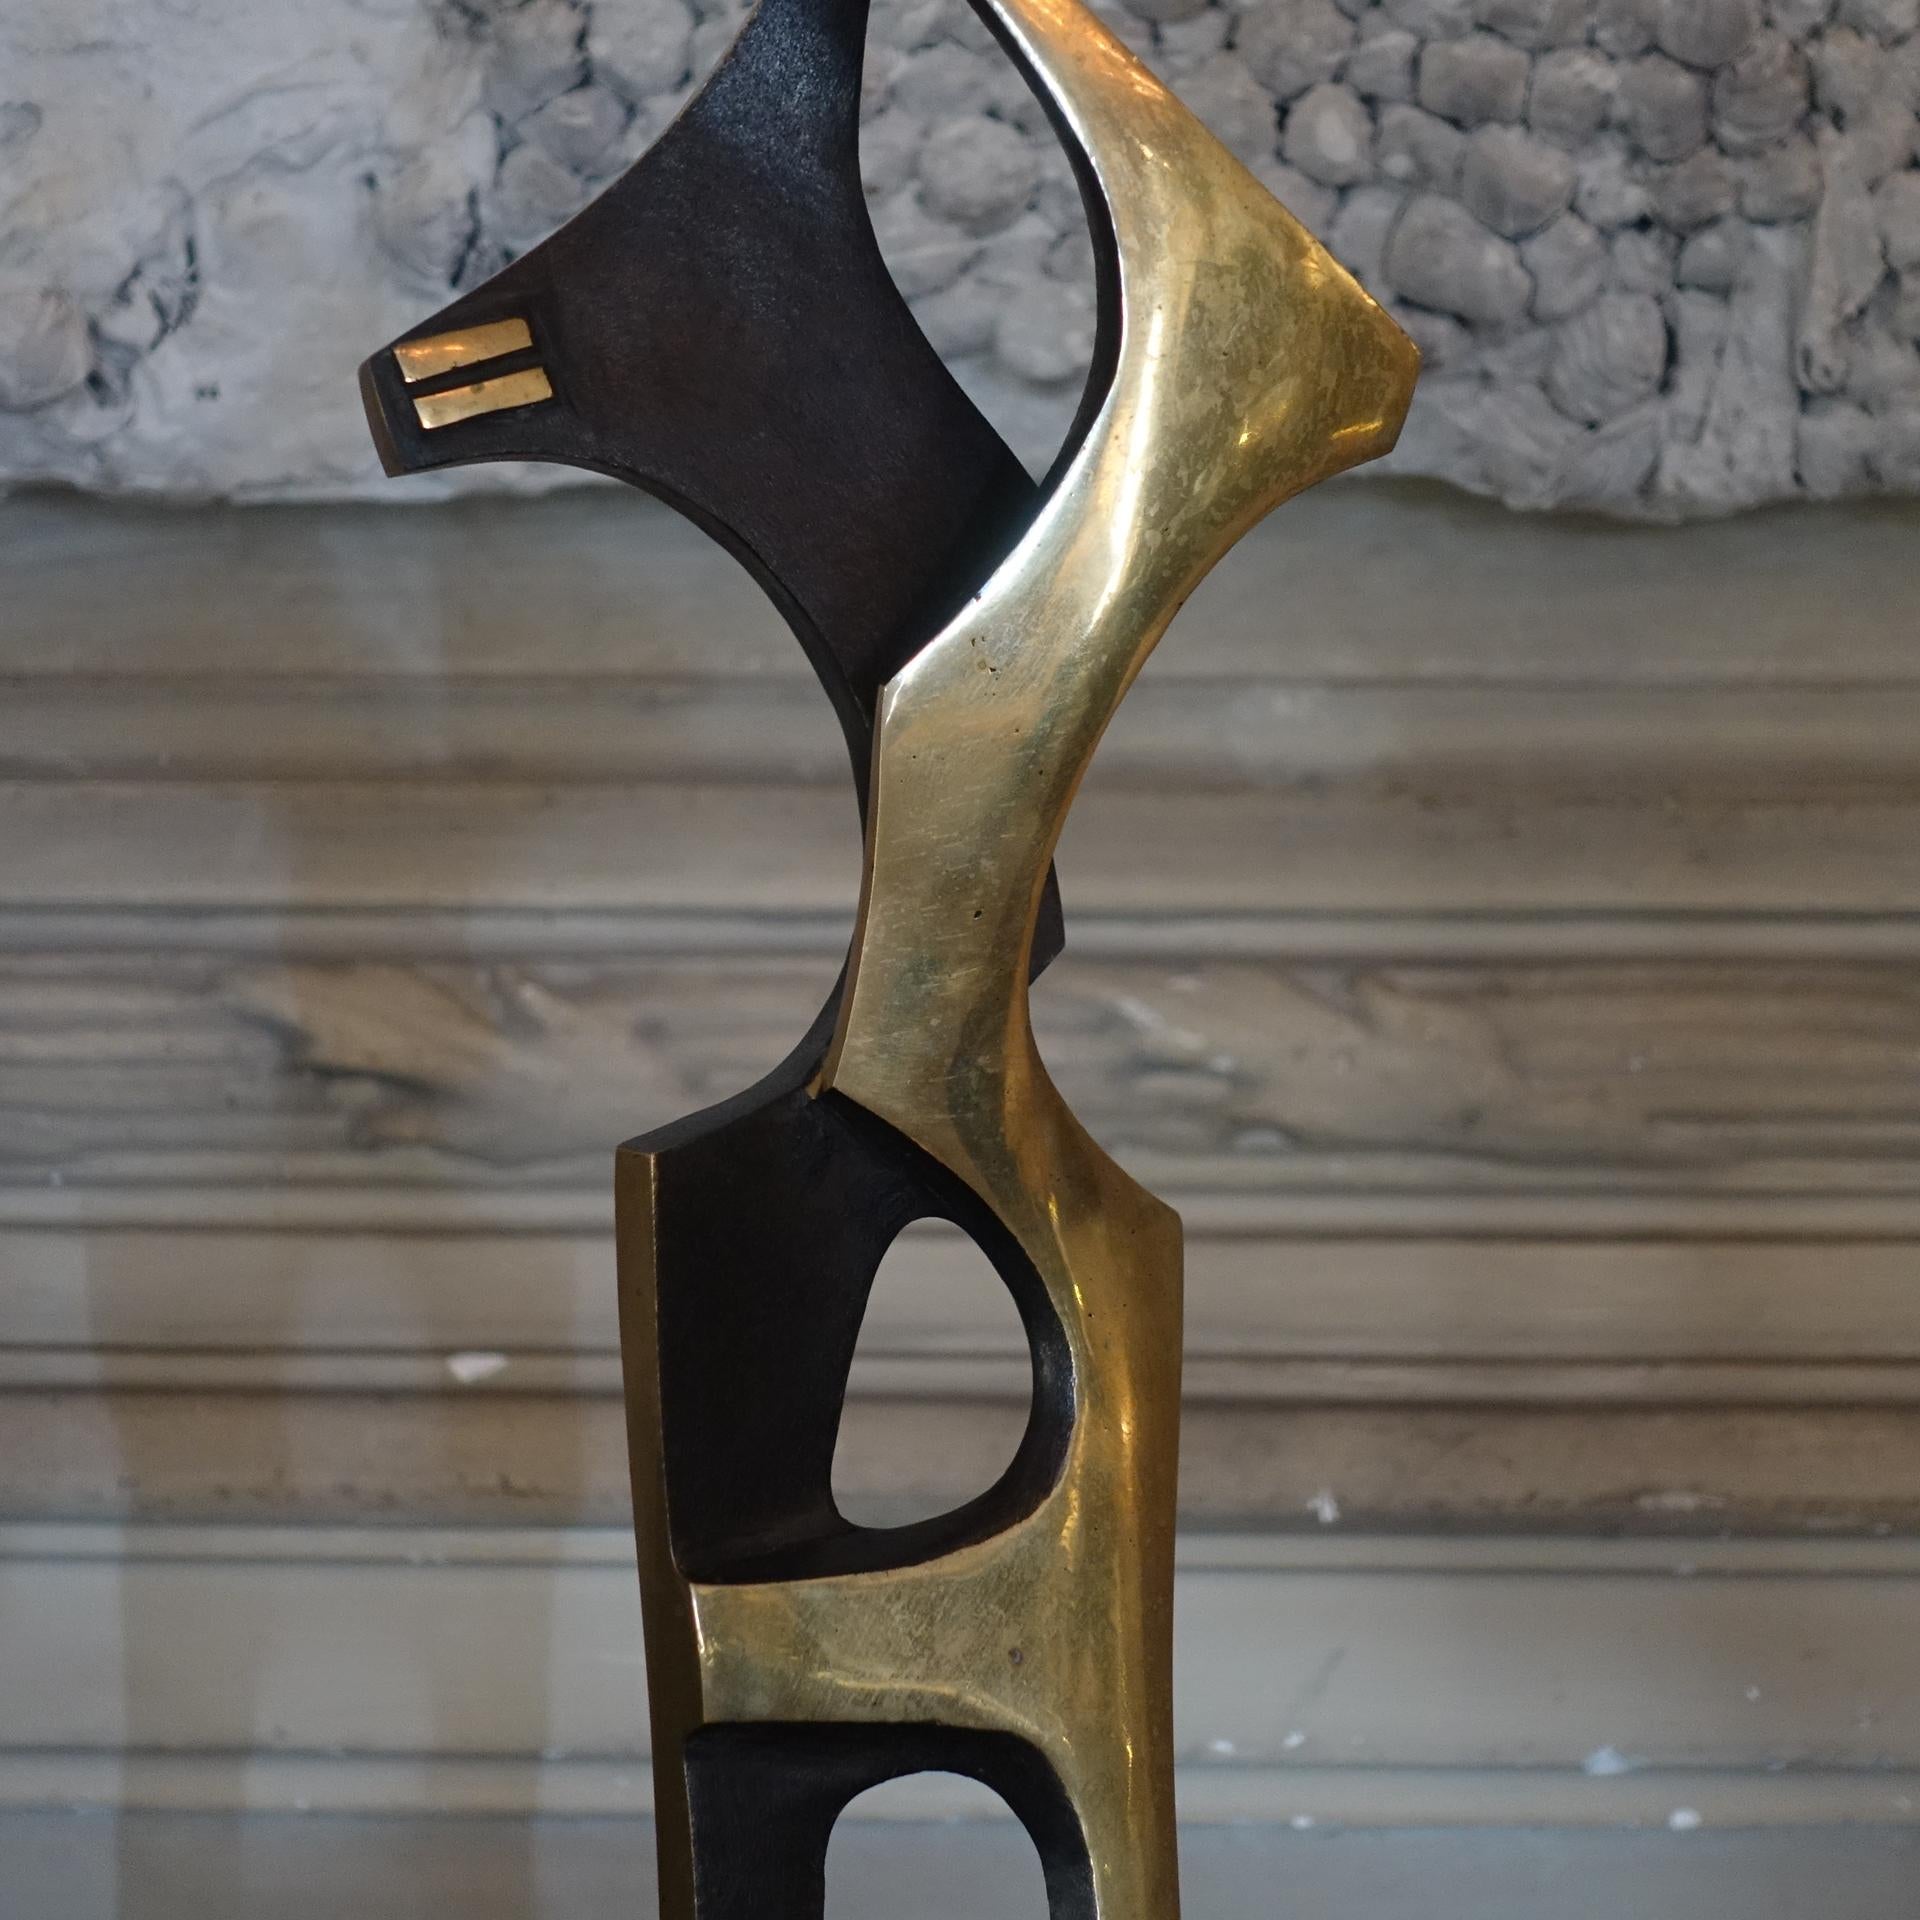 Contemporary Abstract Bronze Sculpture, Signed Tandu. L. 2015